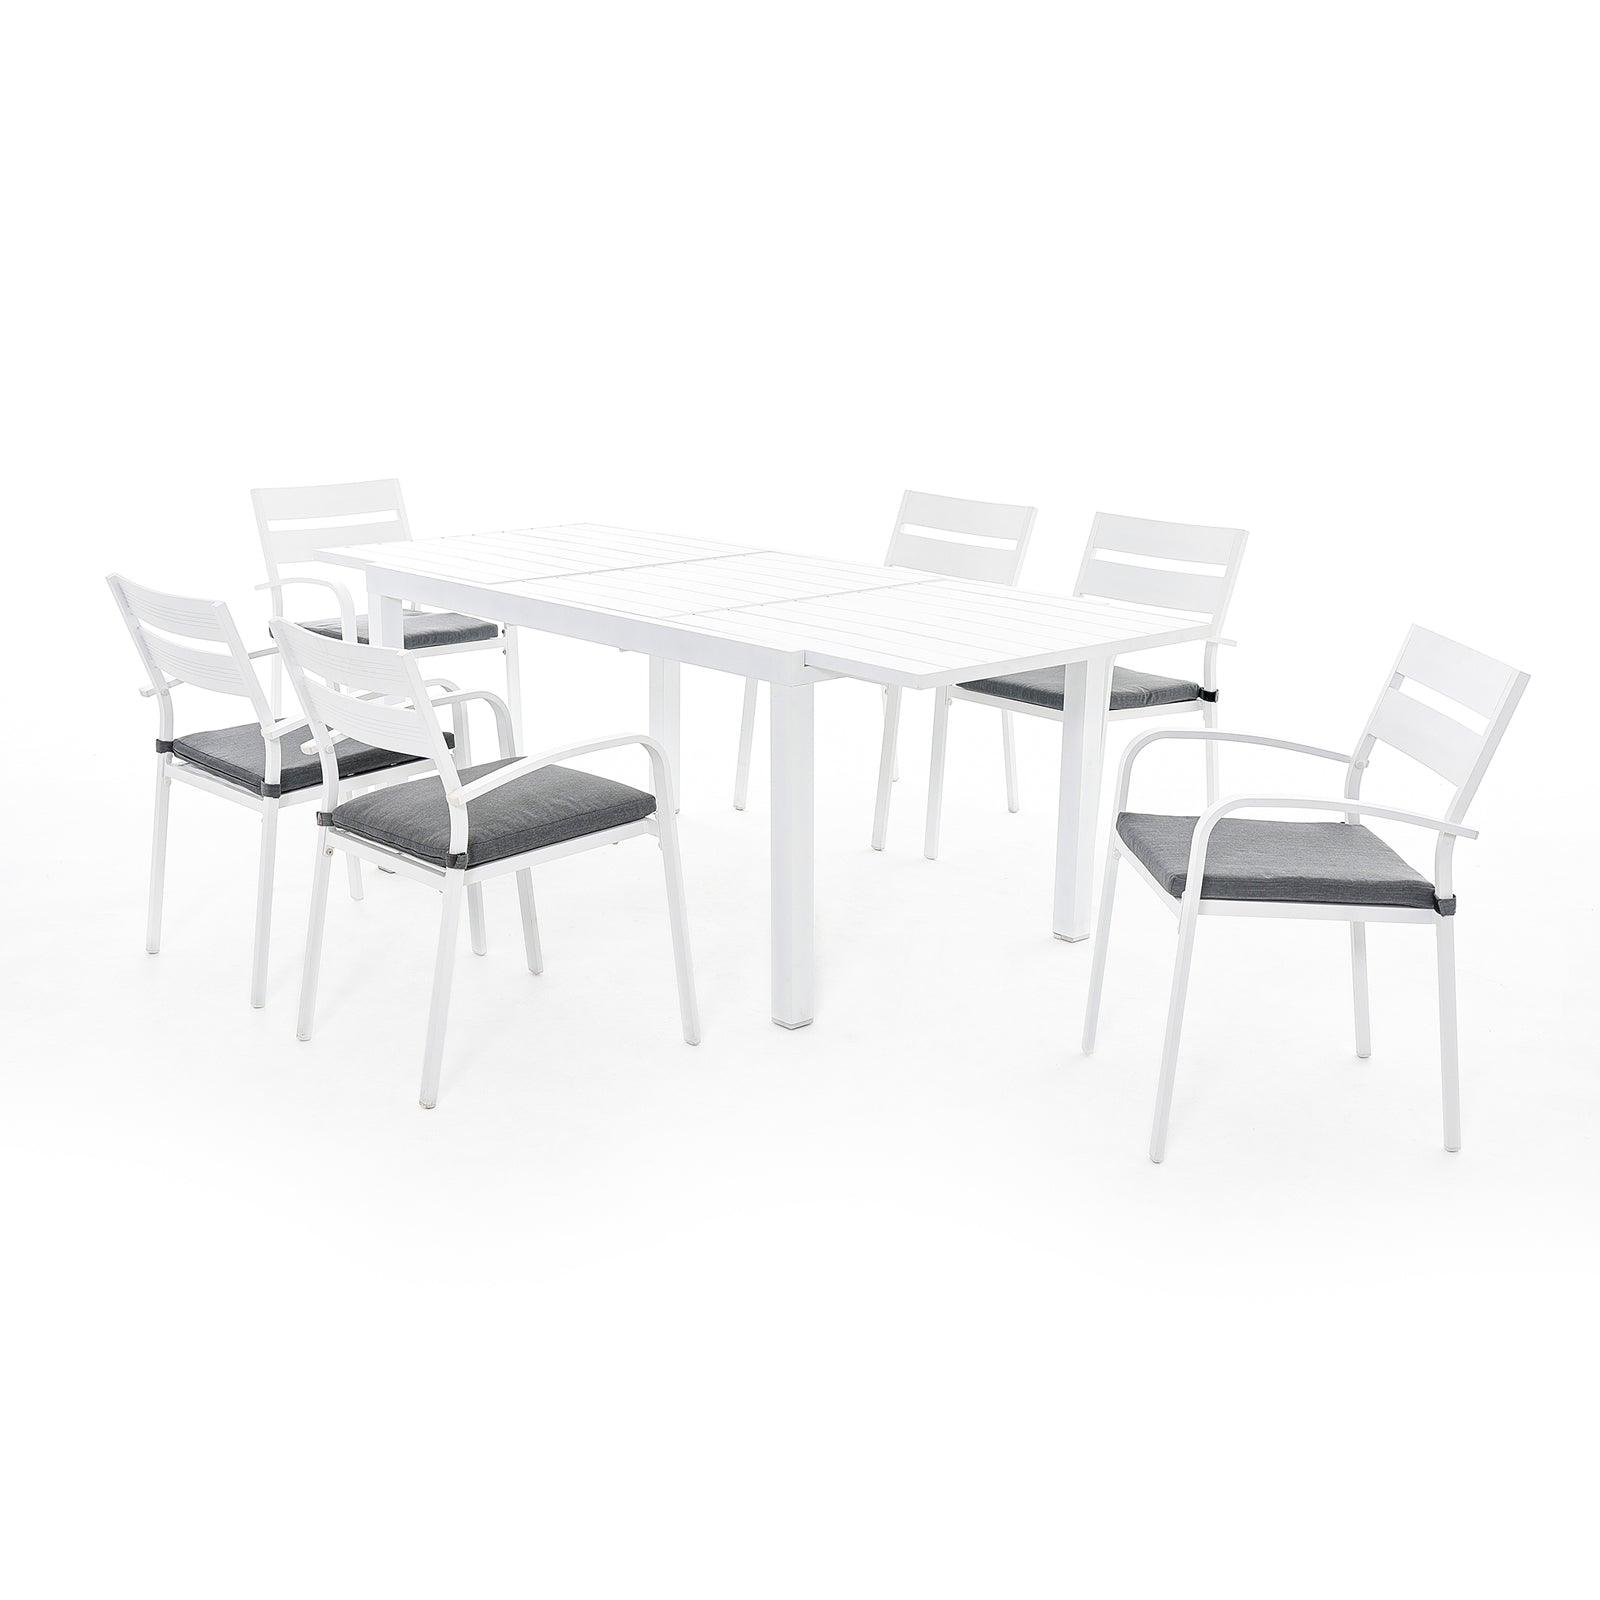 Salina White Aluminum Outdoor Dining Set, 6 dining chairs with cushions and 1 Extendable Table - Jardina Furniture #color_White#Pieces_7-pc.